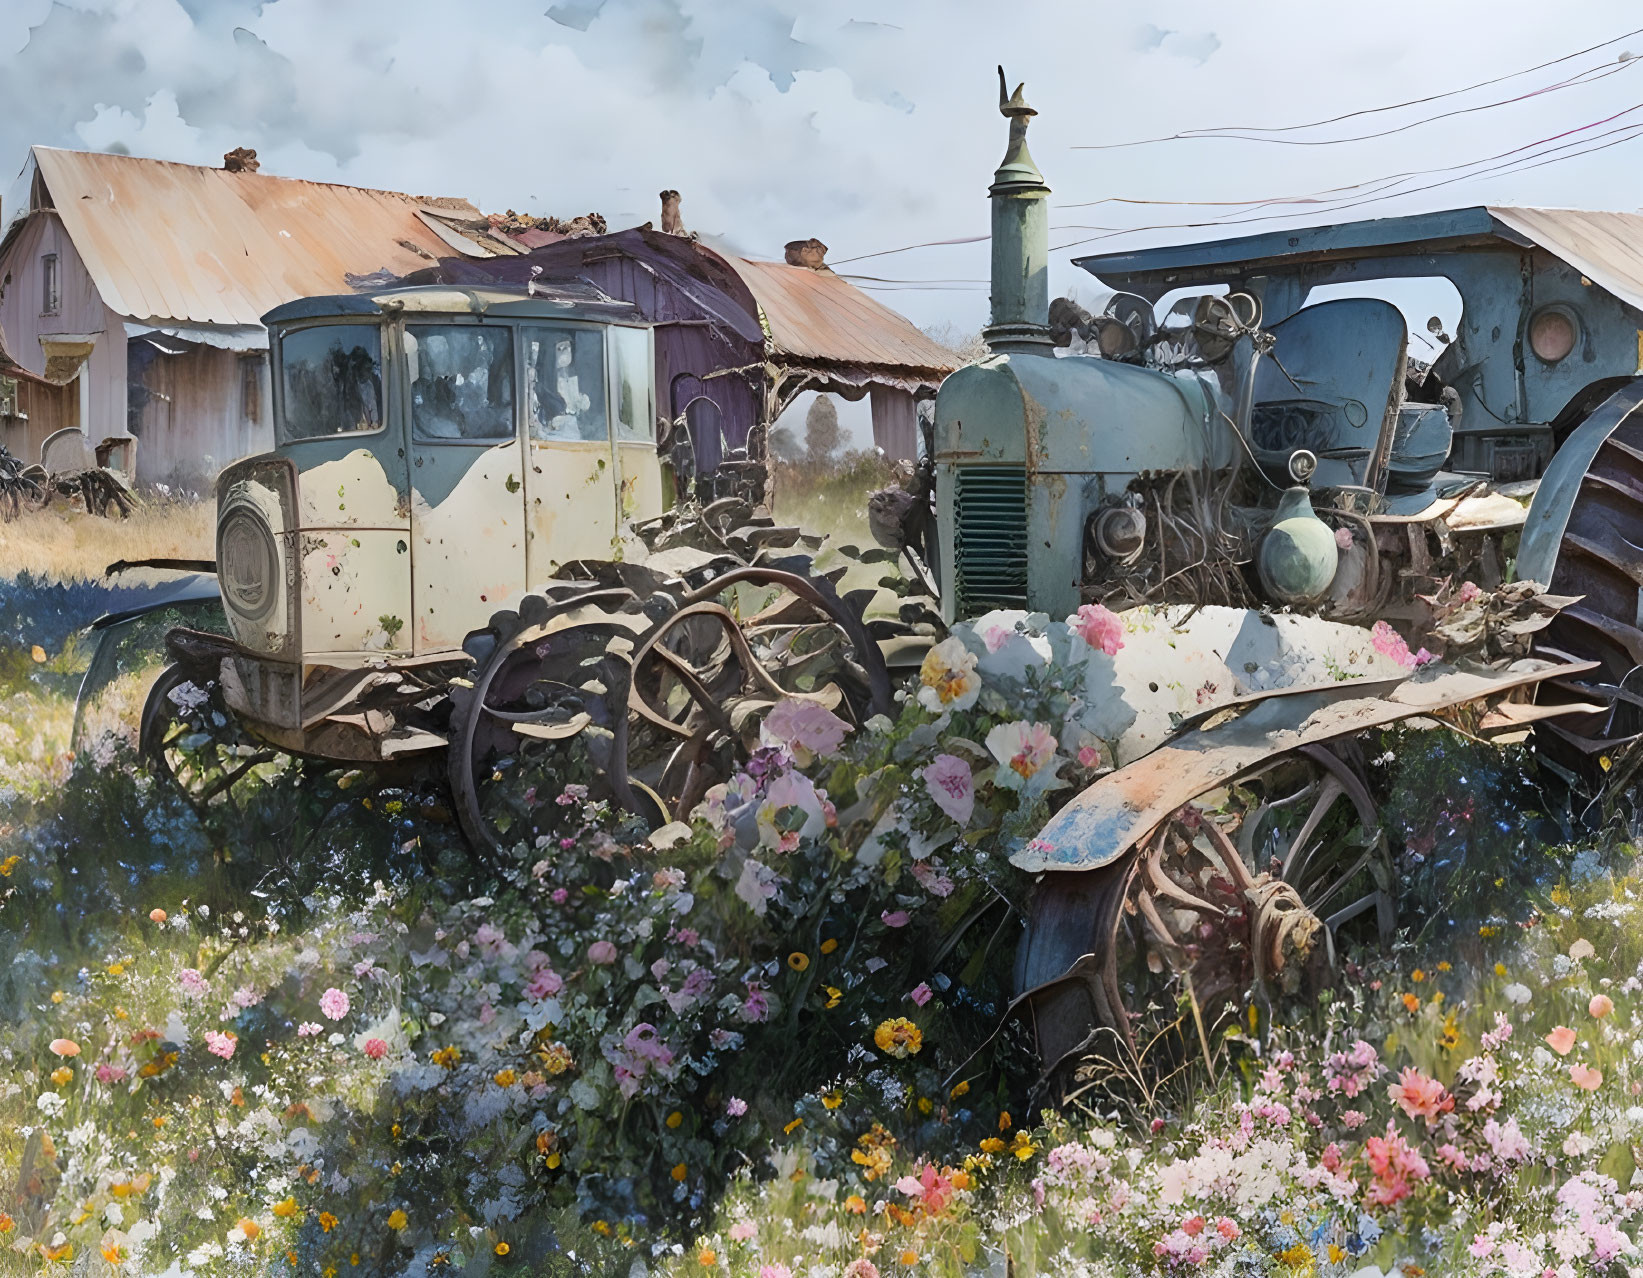 Vintage Vehicles and Tractor Covered in Flowers in Rural Setting